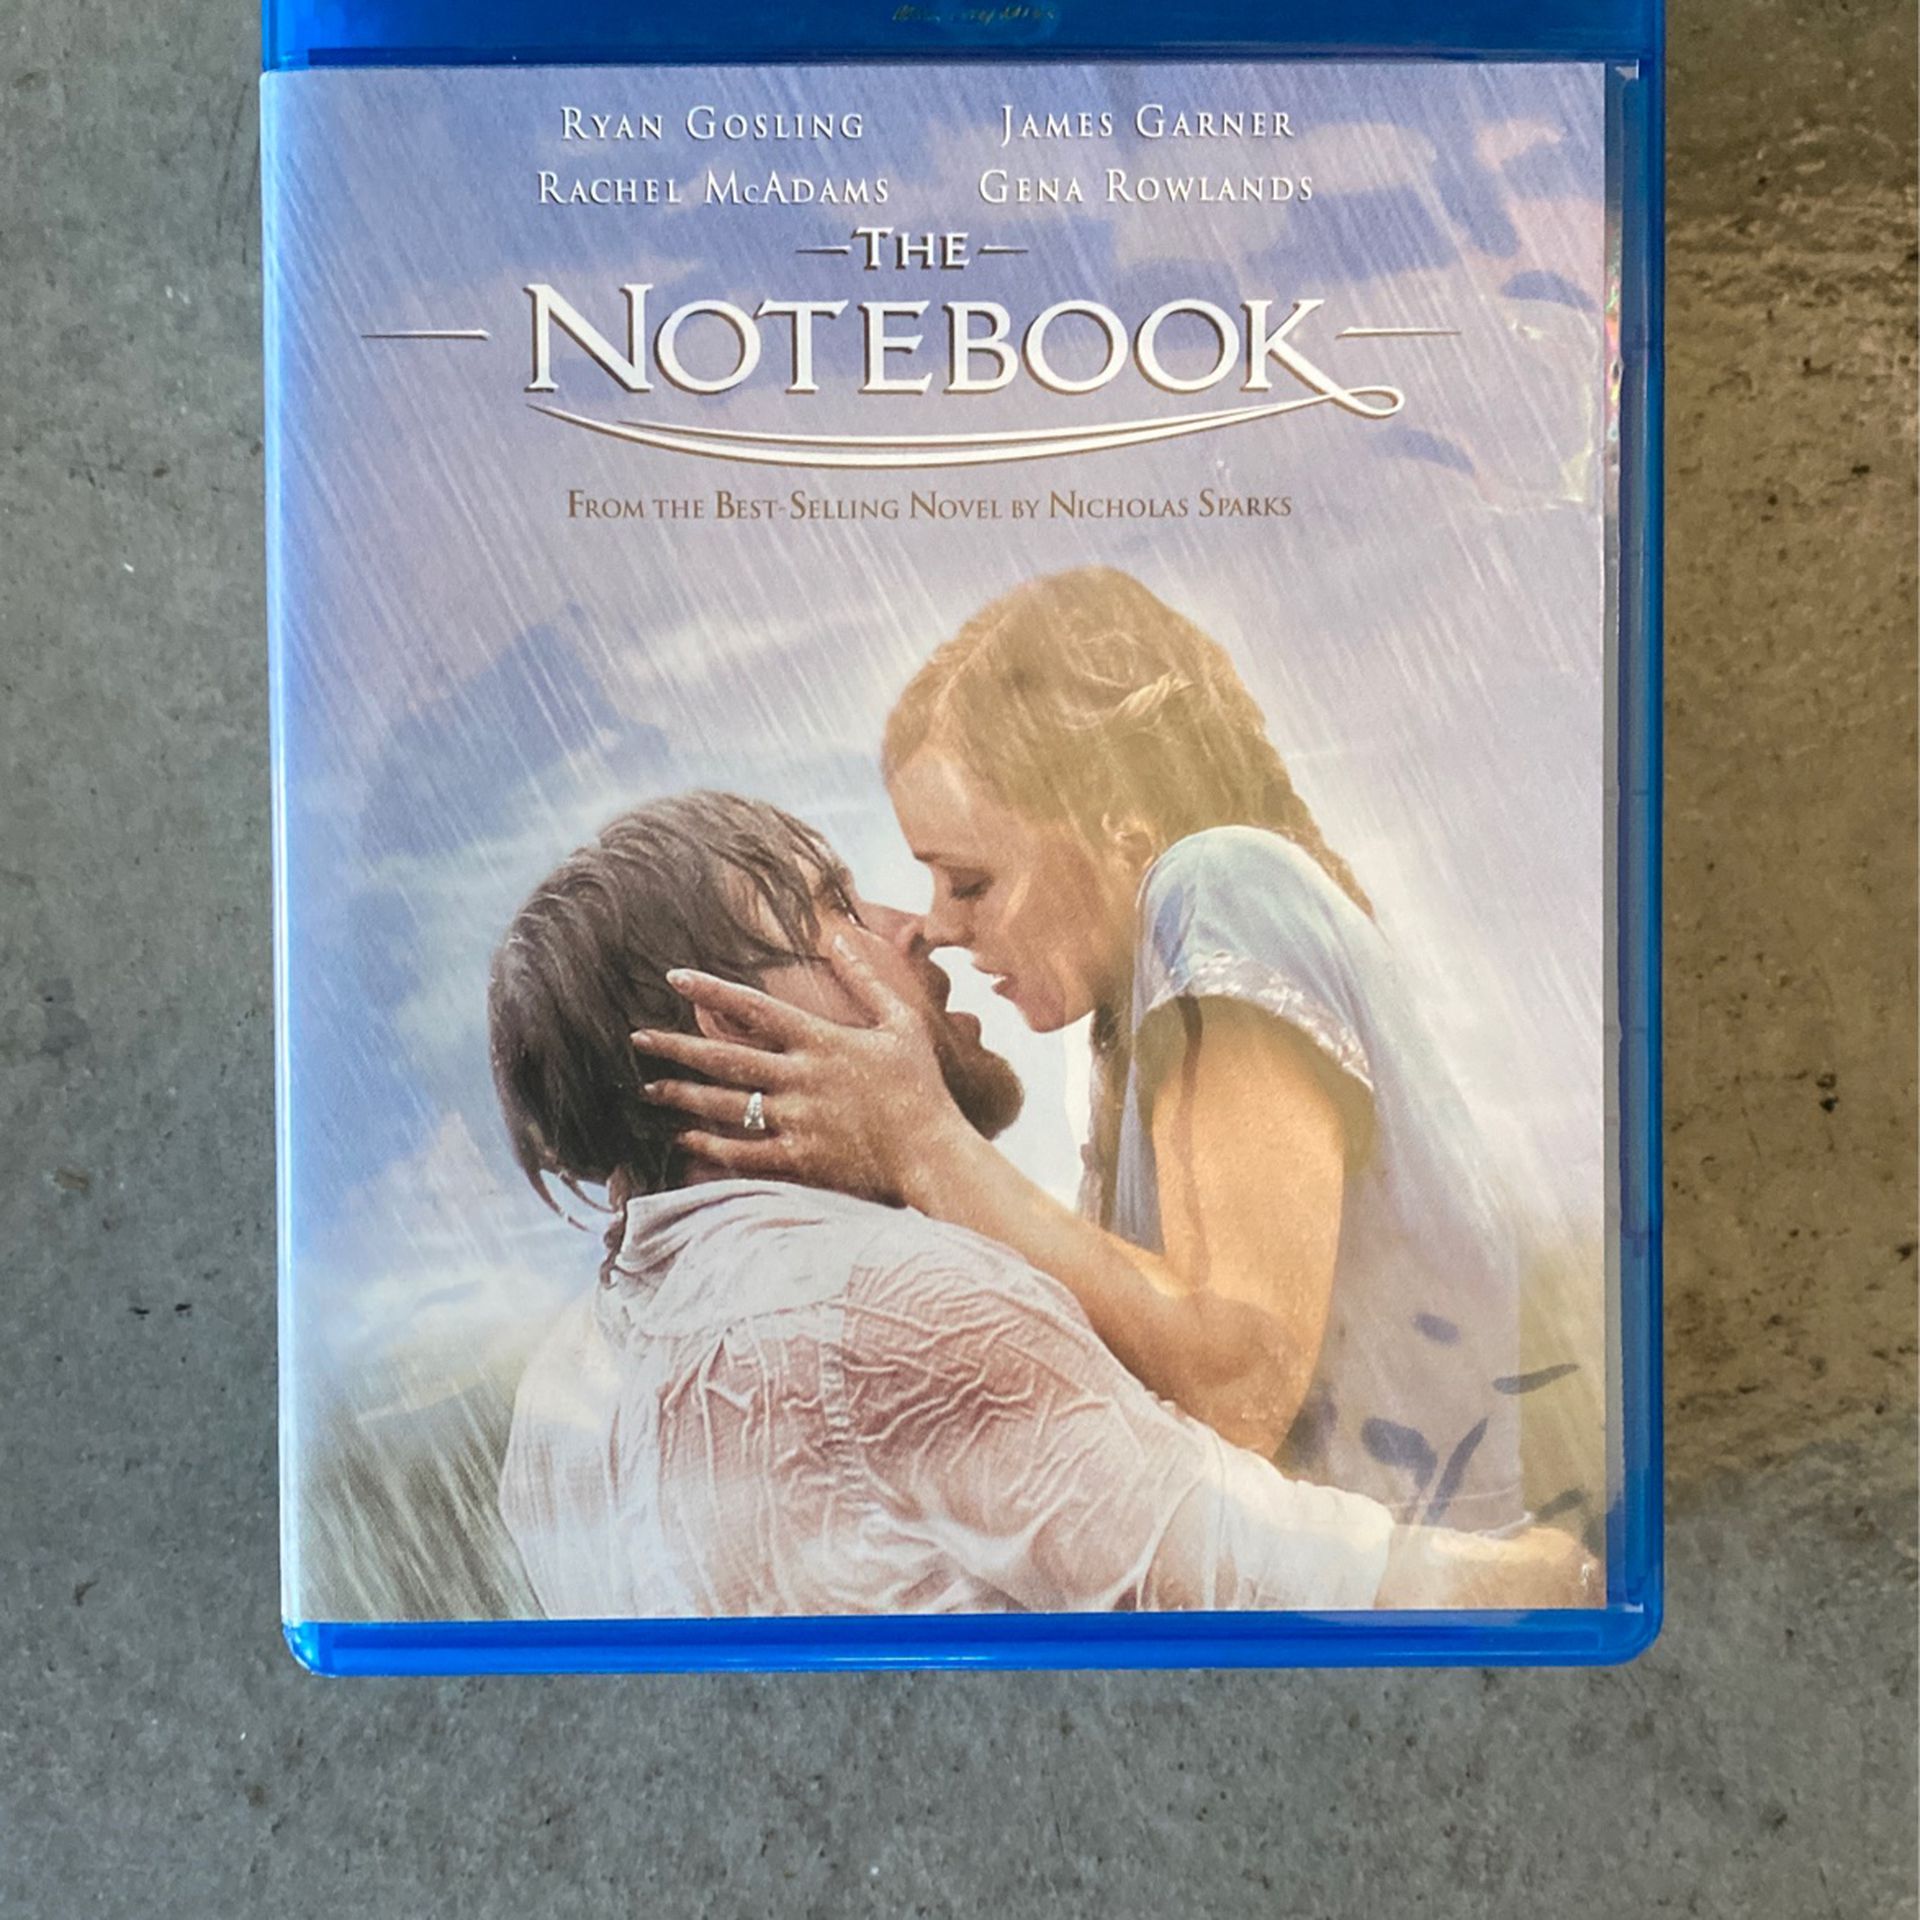 The Notebook Blu Ray